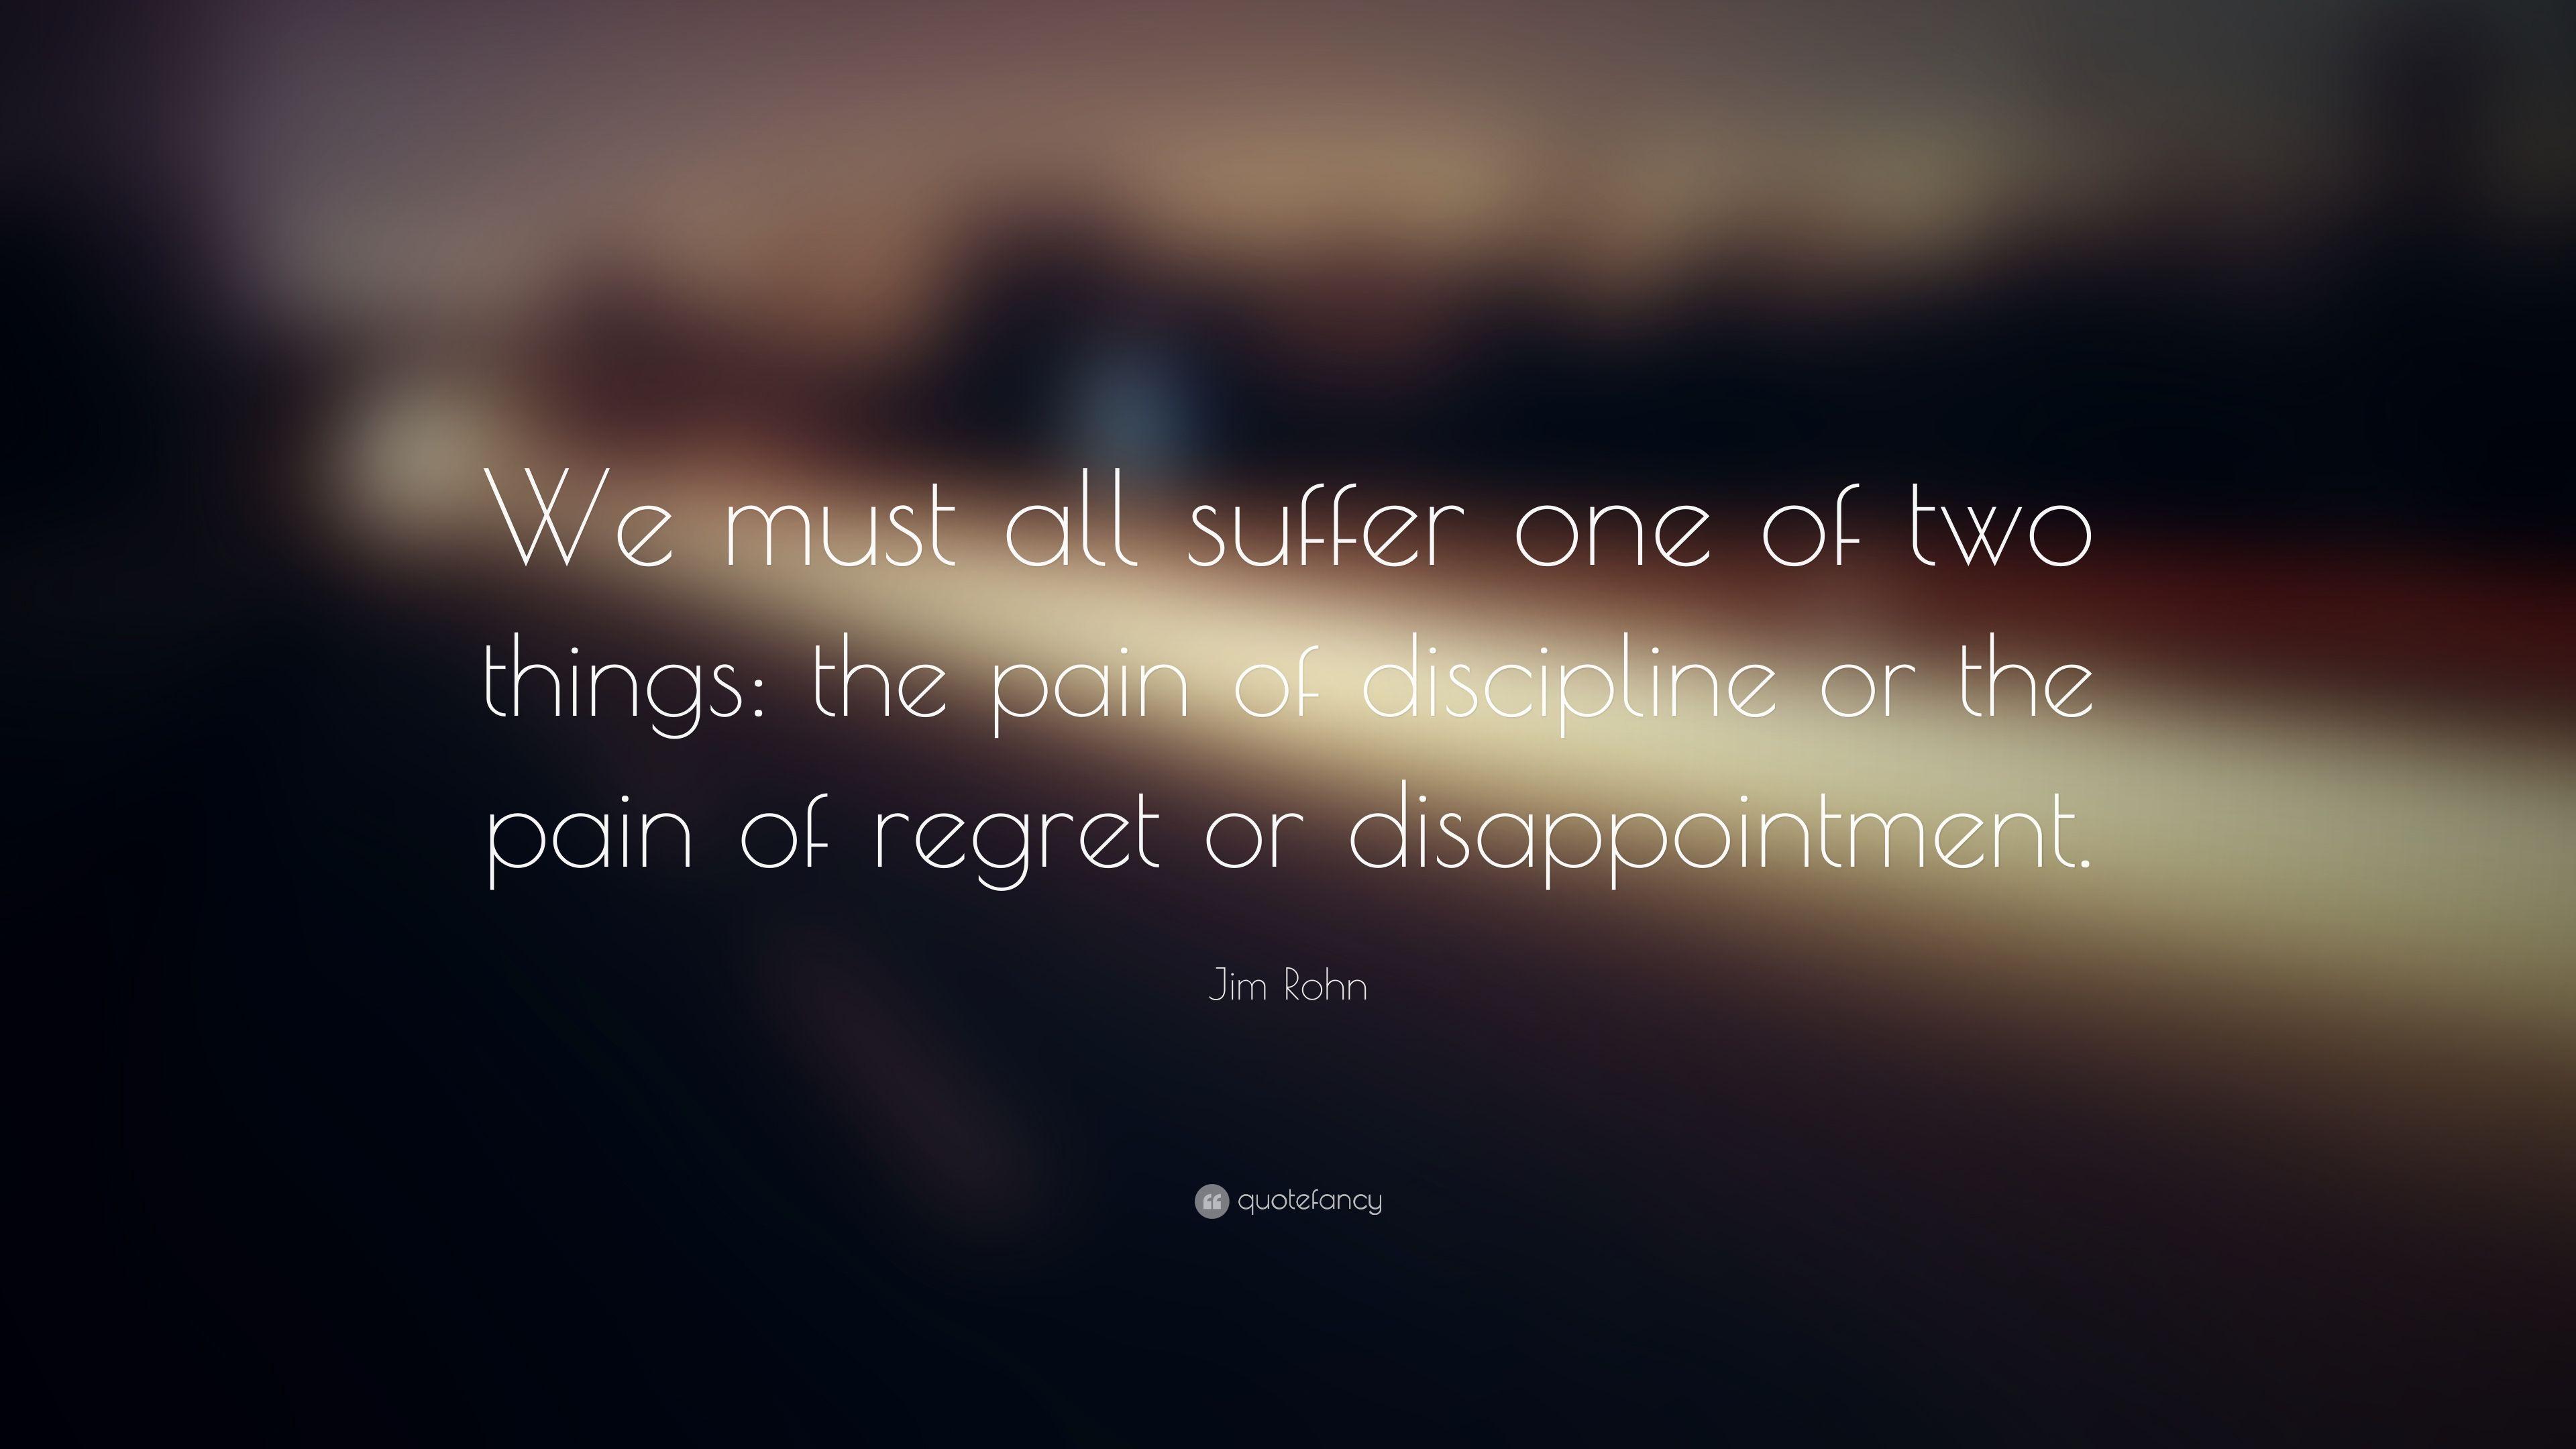 Jim Rohn Quote: “We must all suffer one of two things: the pain of discipline or the pain of regret or disappointment. ” (34 wallpaper)